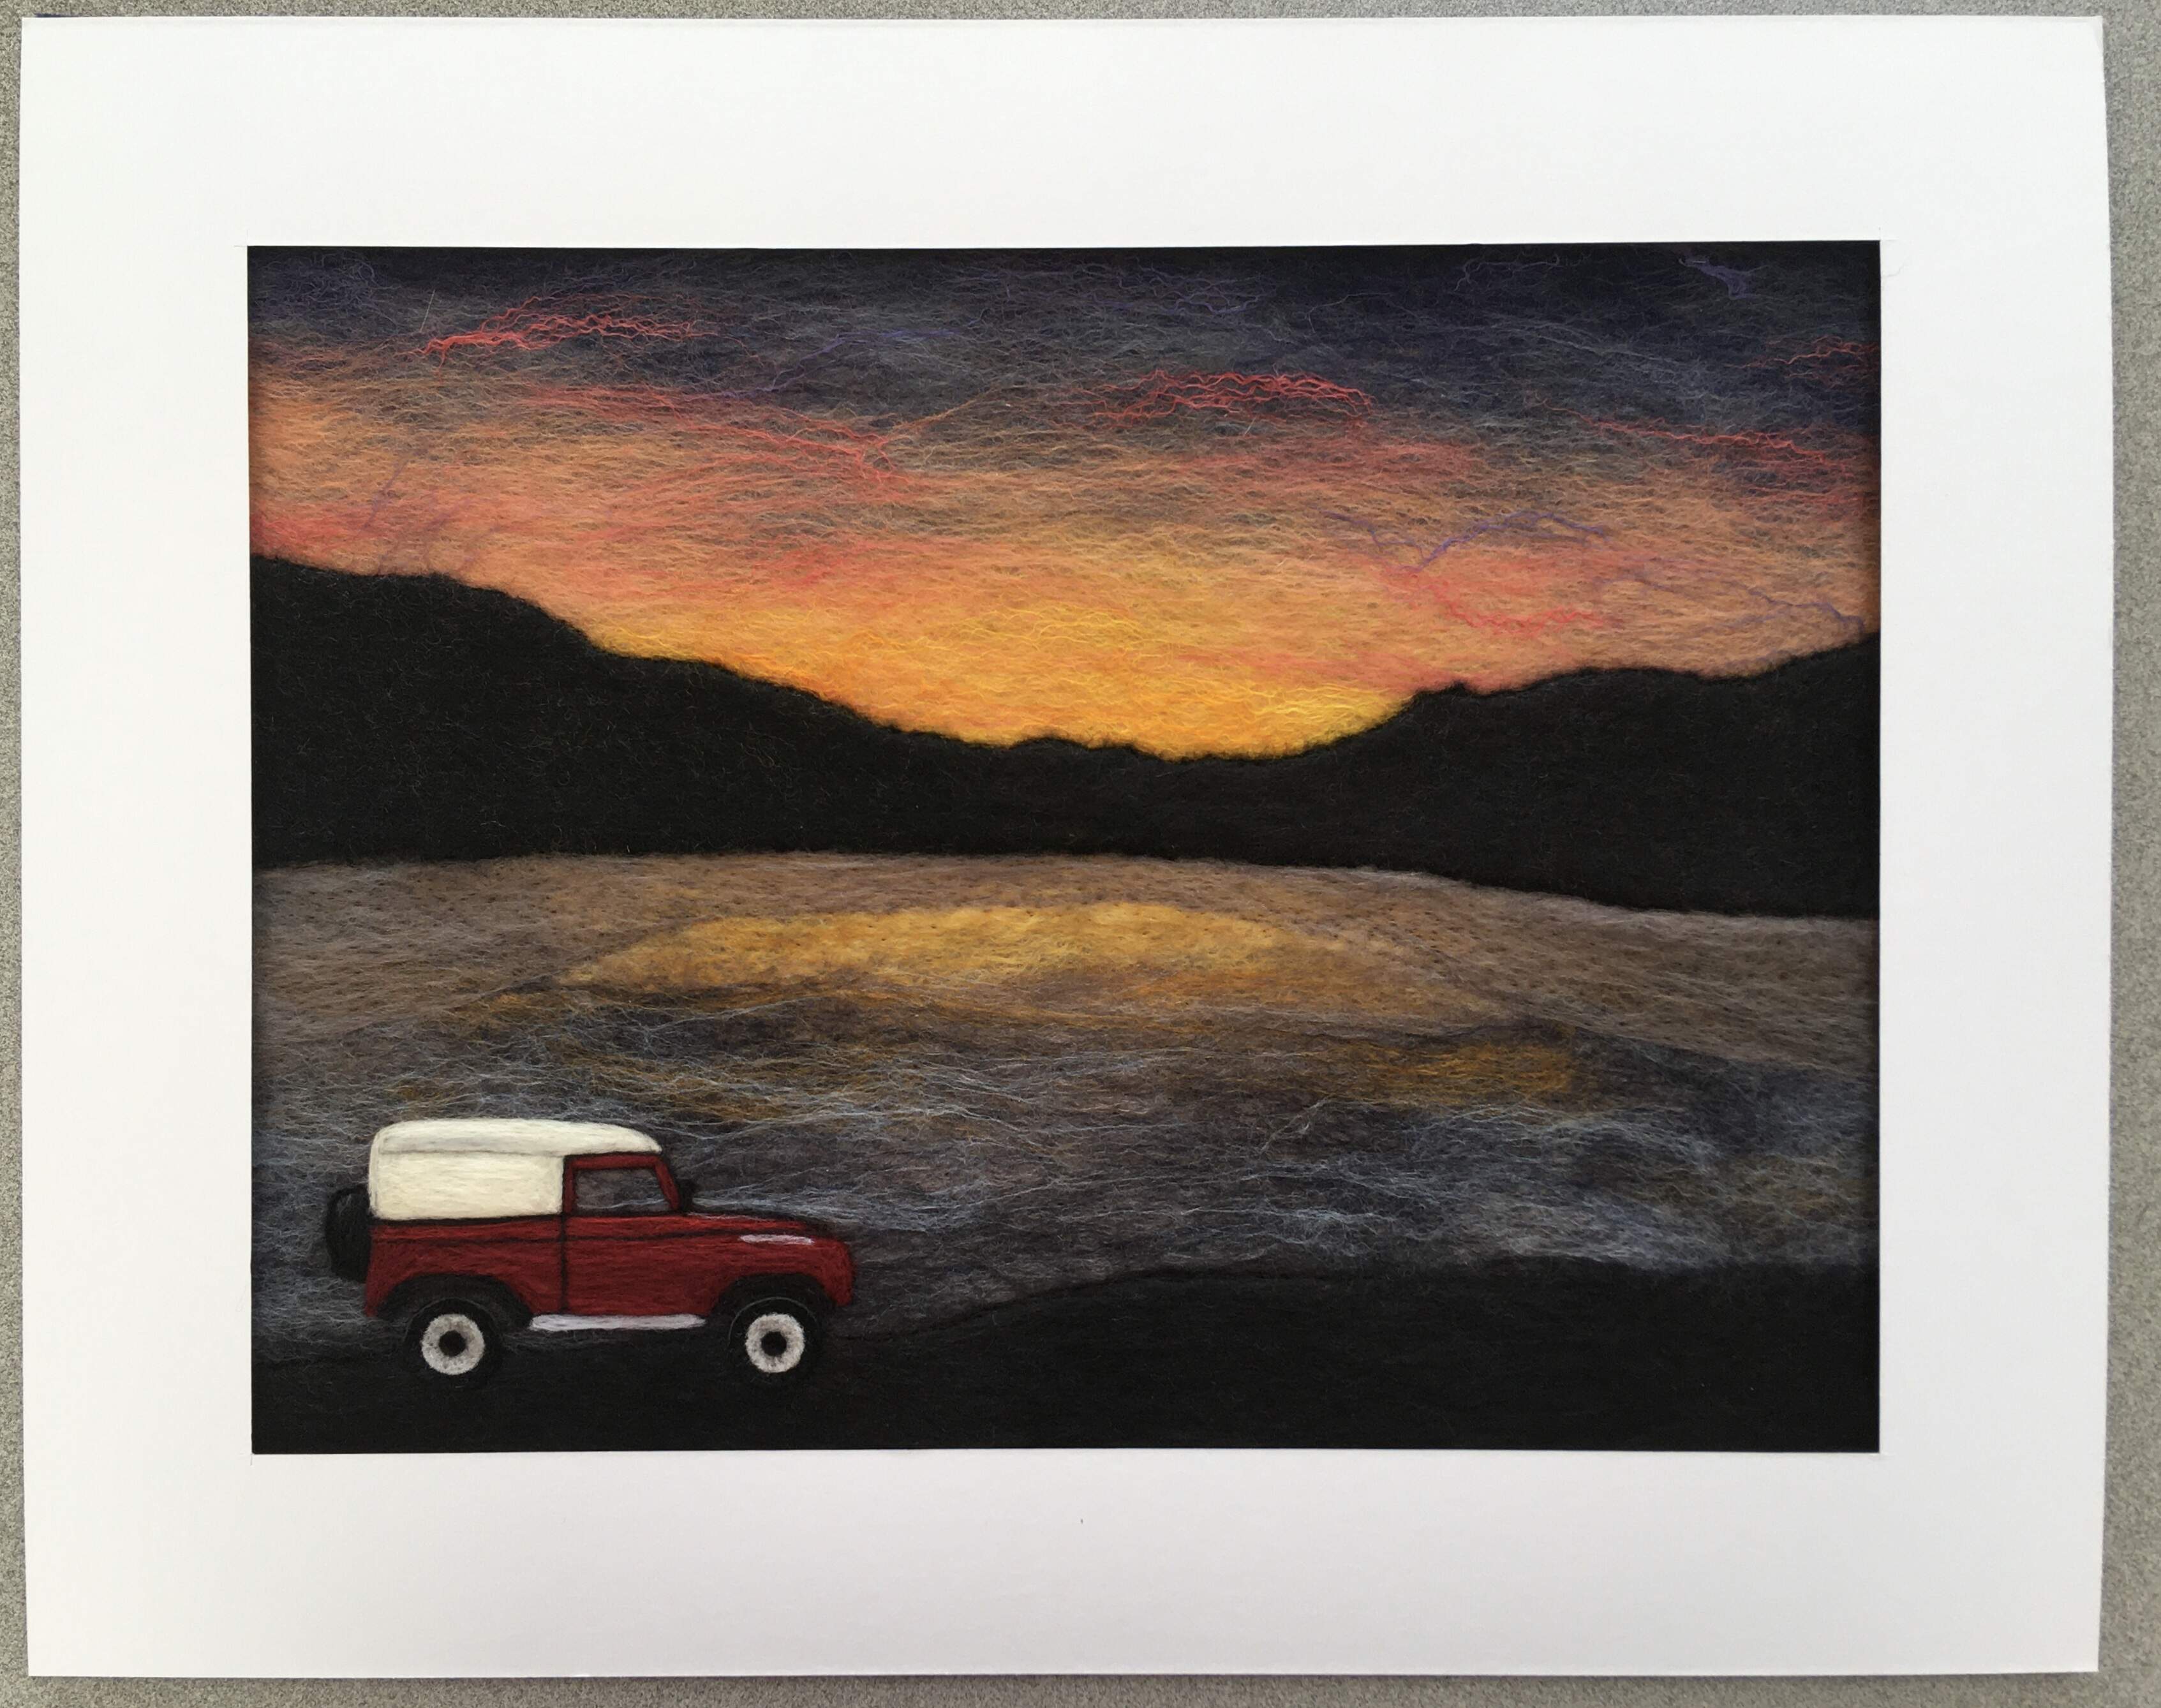 commission felt art picture of Land Rover